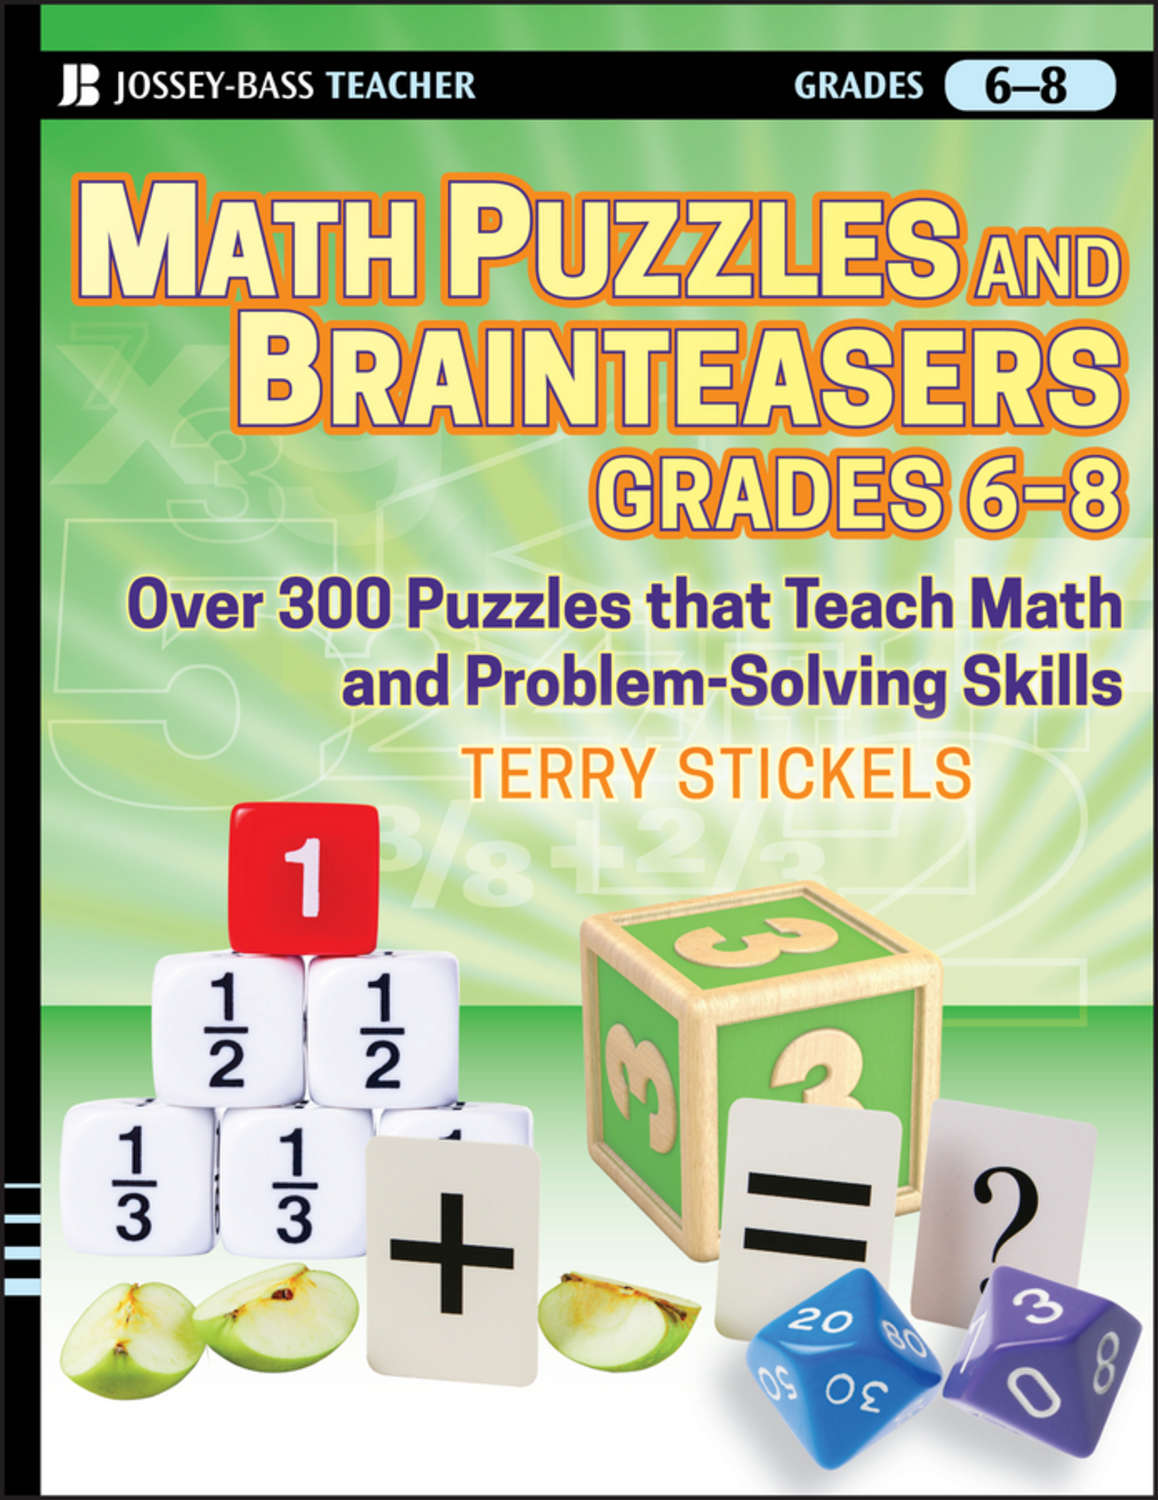 terry-stickels-math-puzzles-and-brainteasers-grades-6-8-over